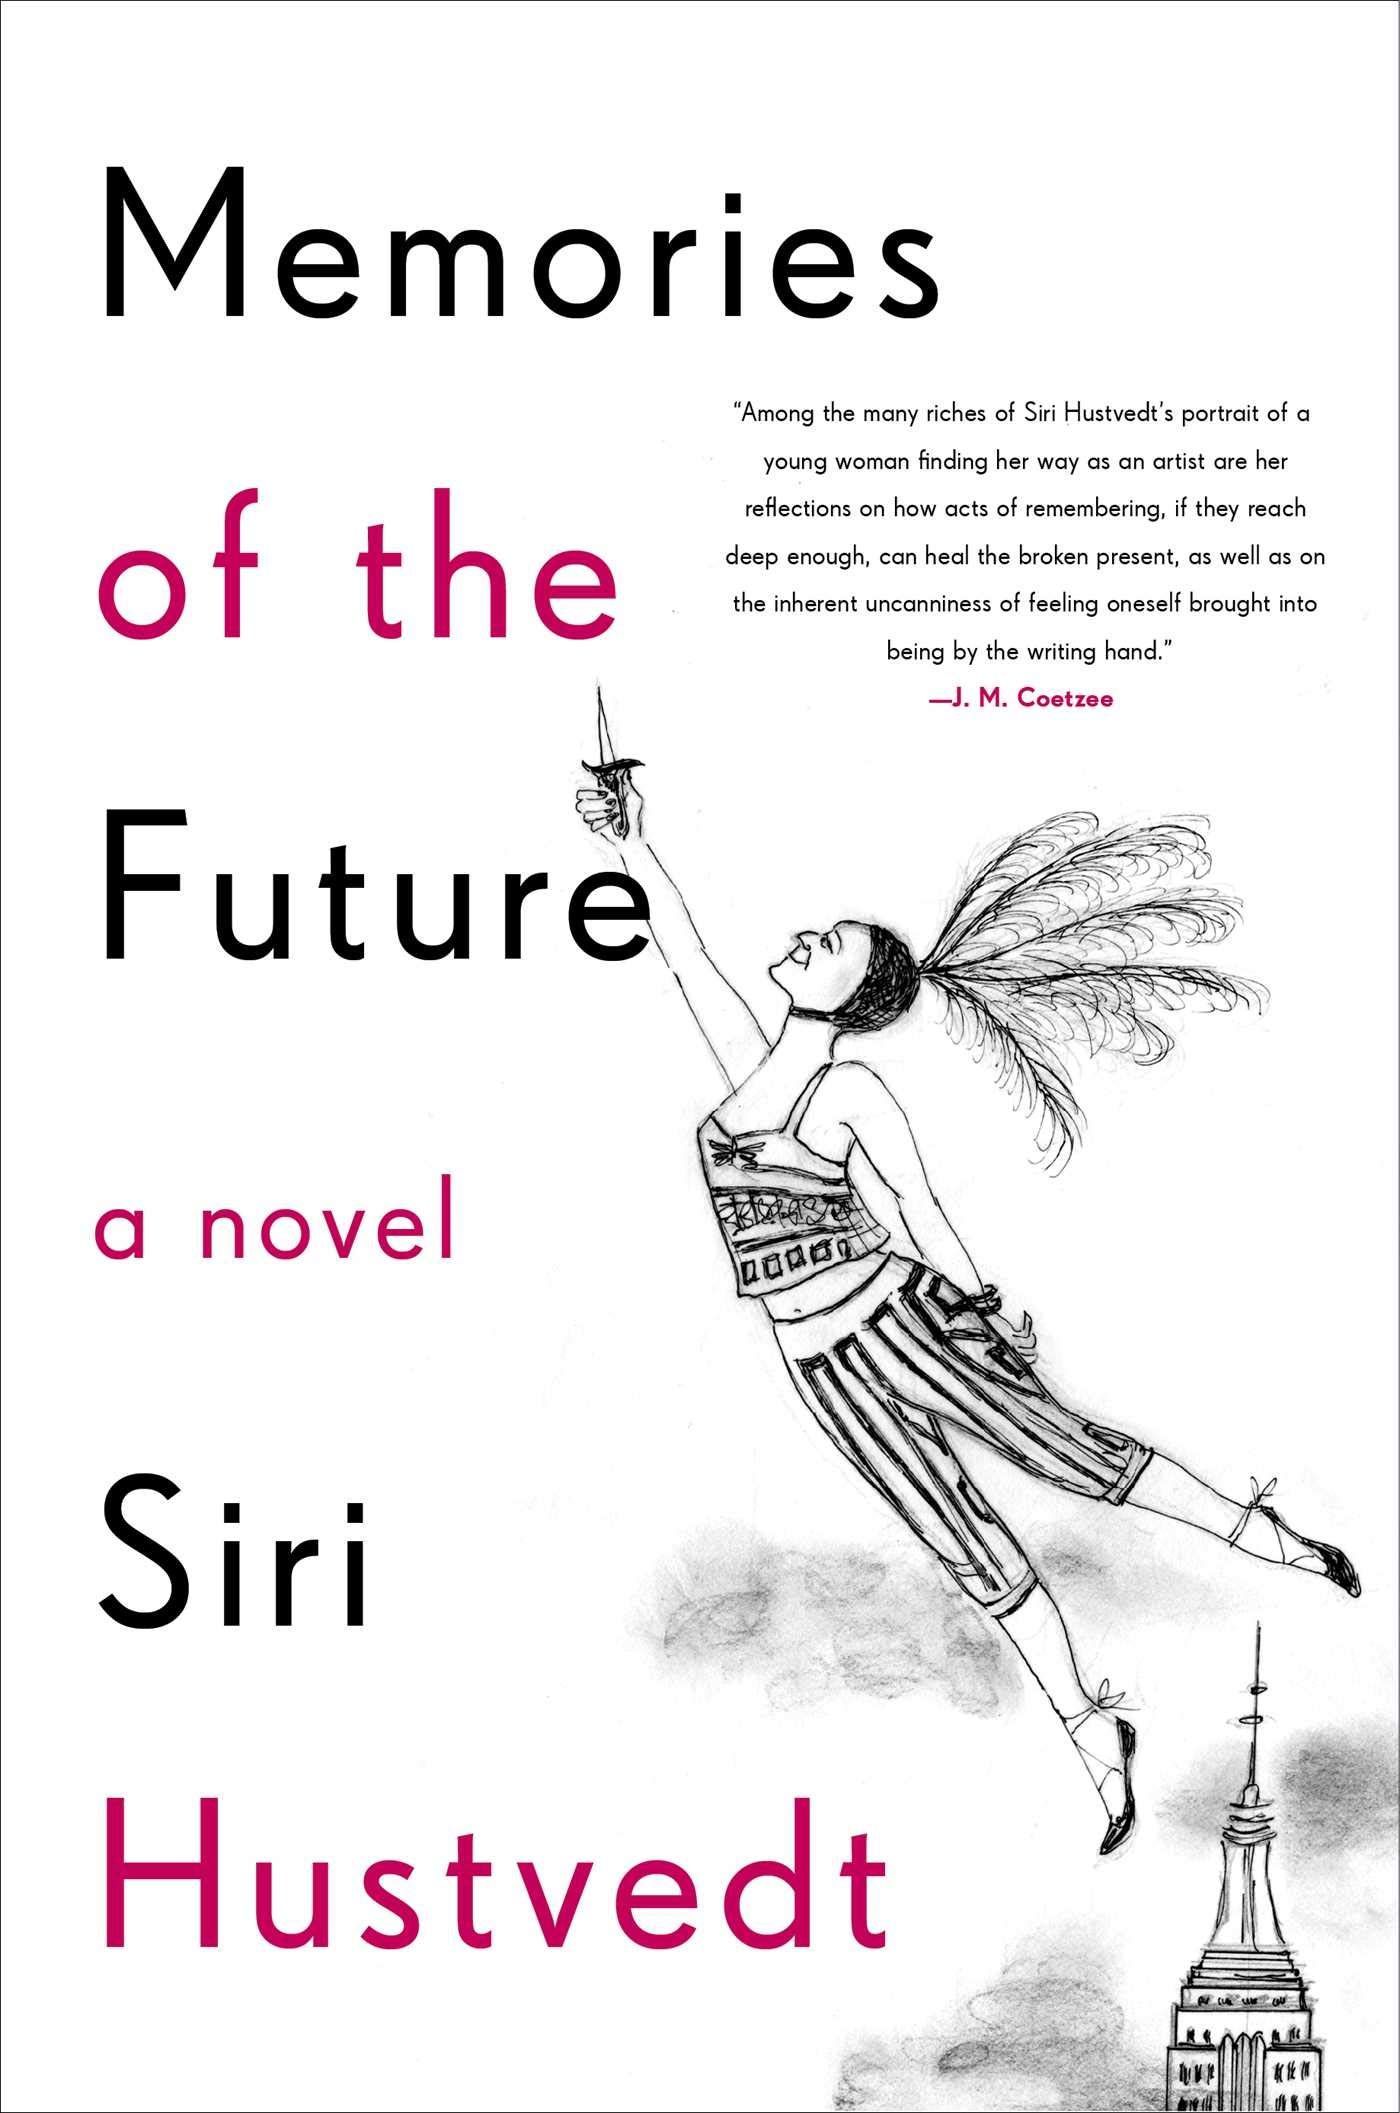 The Many Explanations: On Siri Hustvedt’s “Memories of the Future”